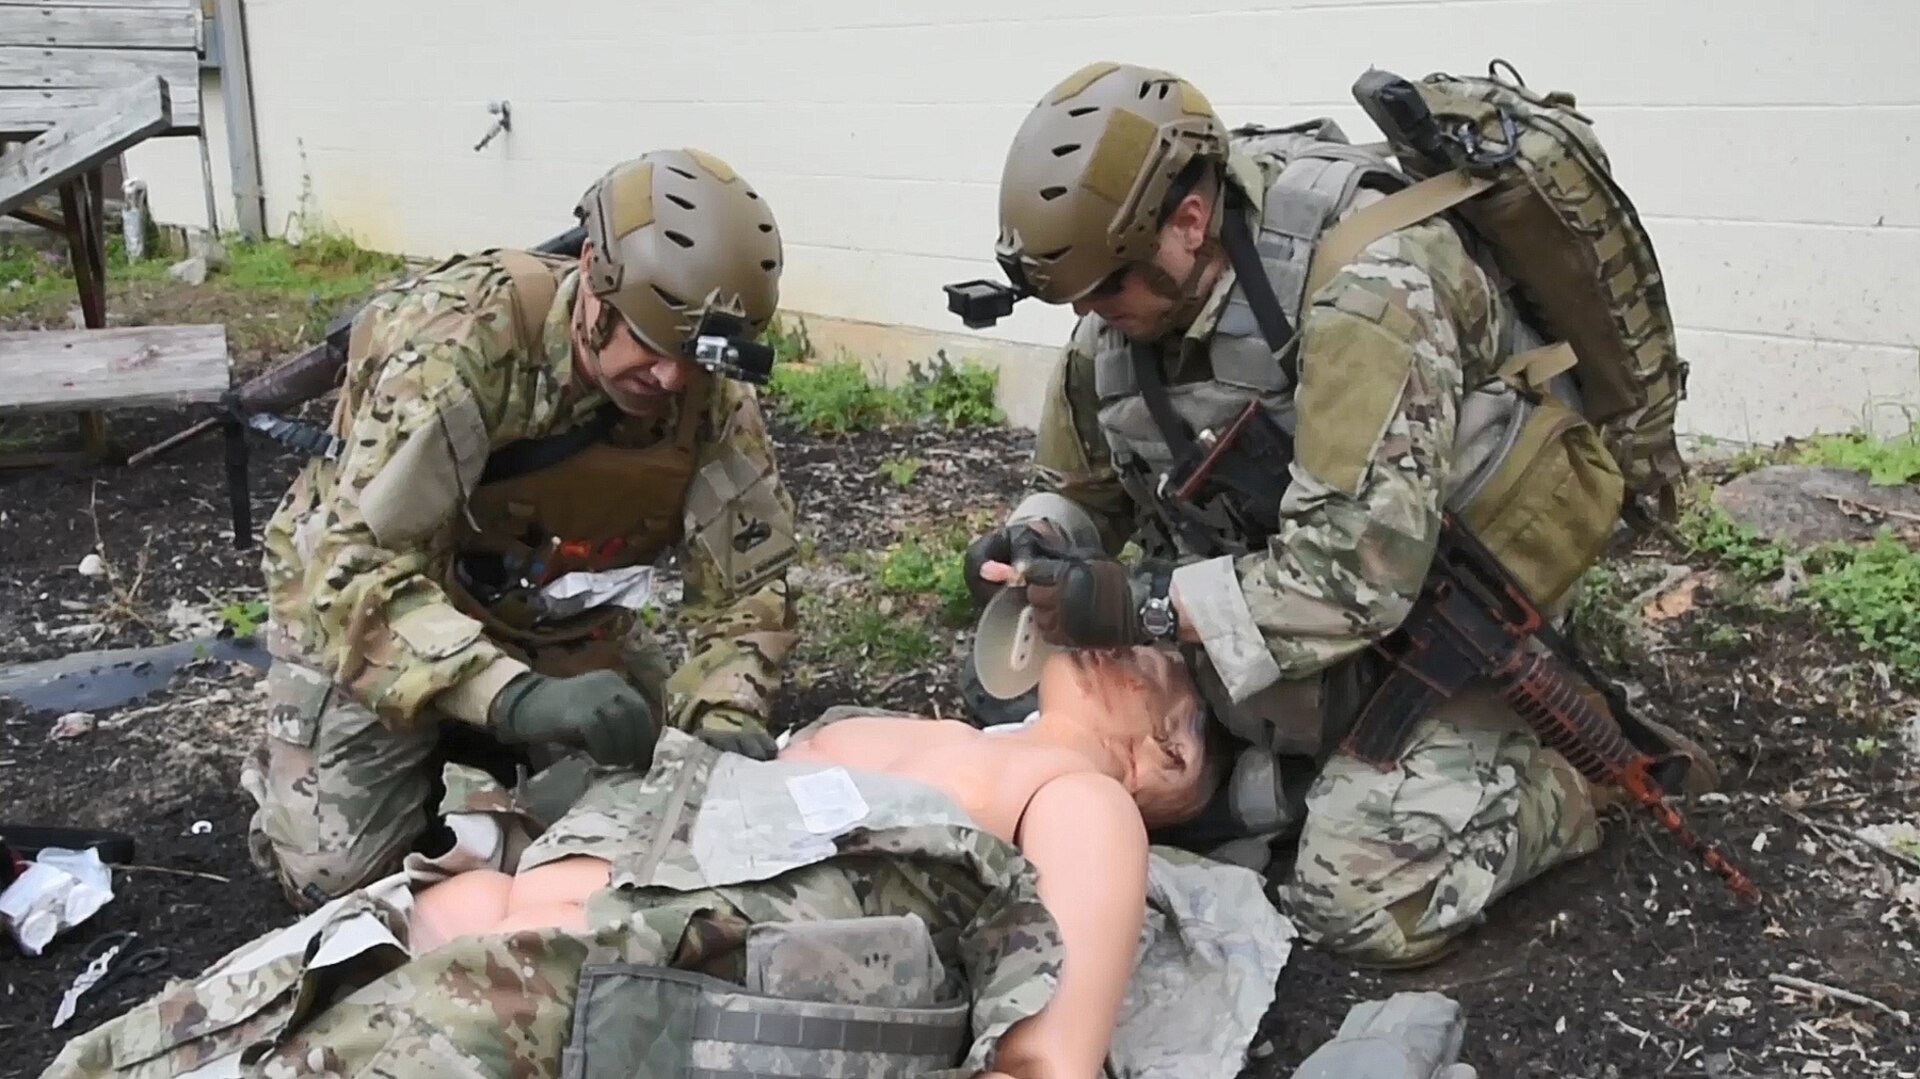 Instructors from the Tactical Combat Medical Care Course, or TCMCC,reenact a trauma scenario consisting of two segments - Care Under Fire and Tactical Field Care. The course is geared toward medical doctors, physician's assistants, nurses and senior medics in preparation for deployment to hostile environments. TCMCC prepares students for potential injuries and wounds they might encounter on the battlefield. The intense 5-day course is offered several times a year and is held at Joint Base San Antonio-Fort Sam Houston and JBSA-Camp Bullis.